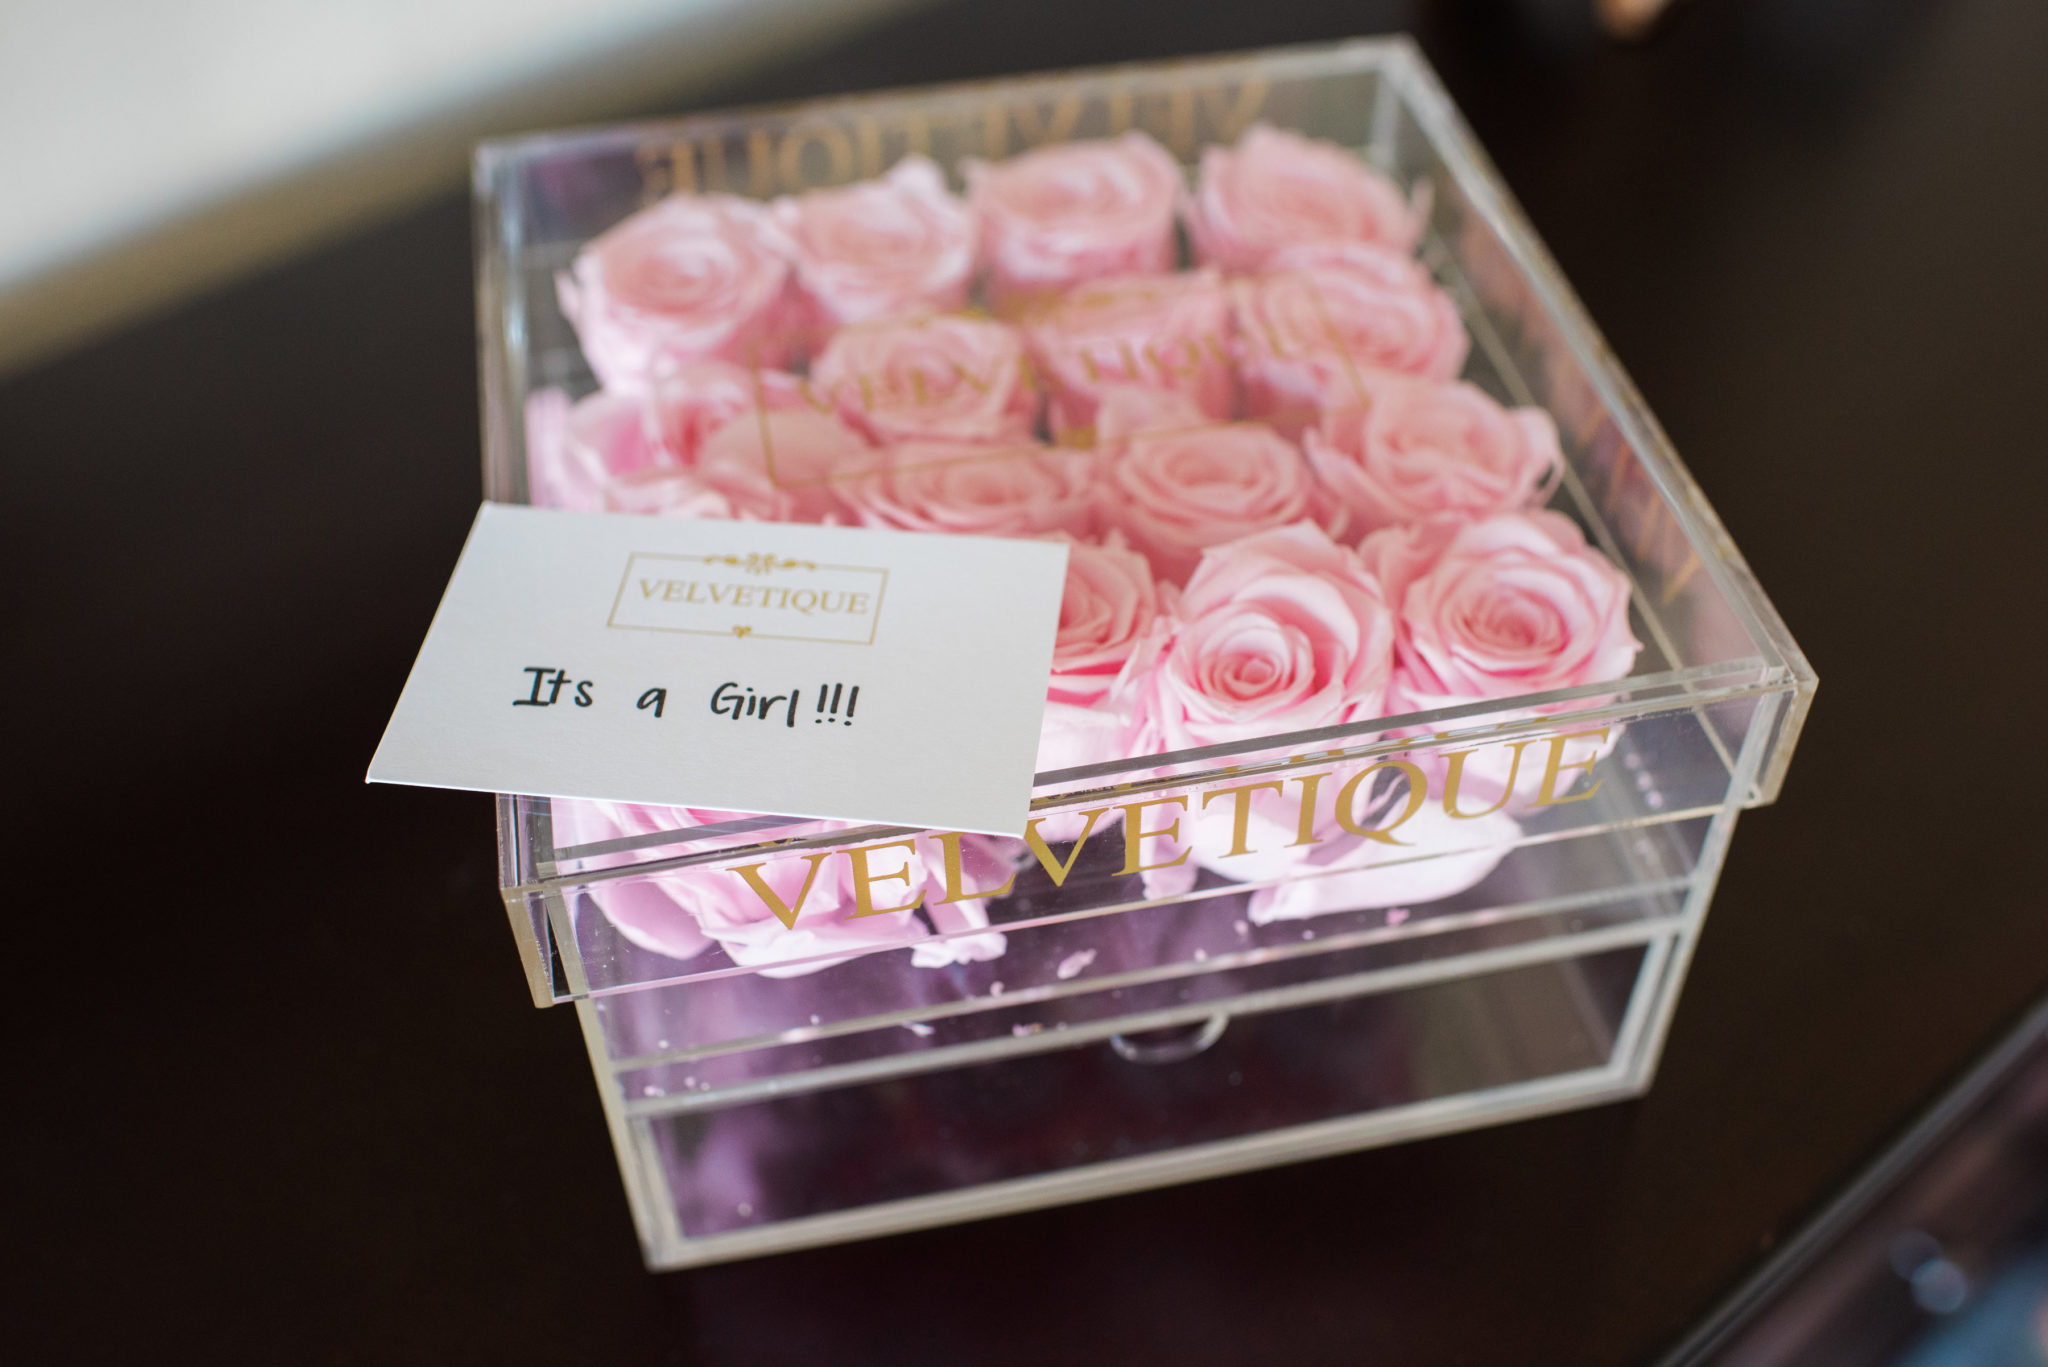 it's a girl announcement with eternity roses from velvetique la - Gender Reveal Idea: It's a ... Boy or Girl?? by popular Las Vegas lifestyle blogger Outfits & Outings